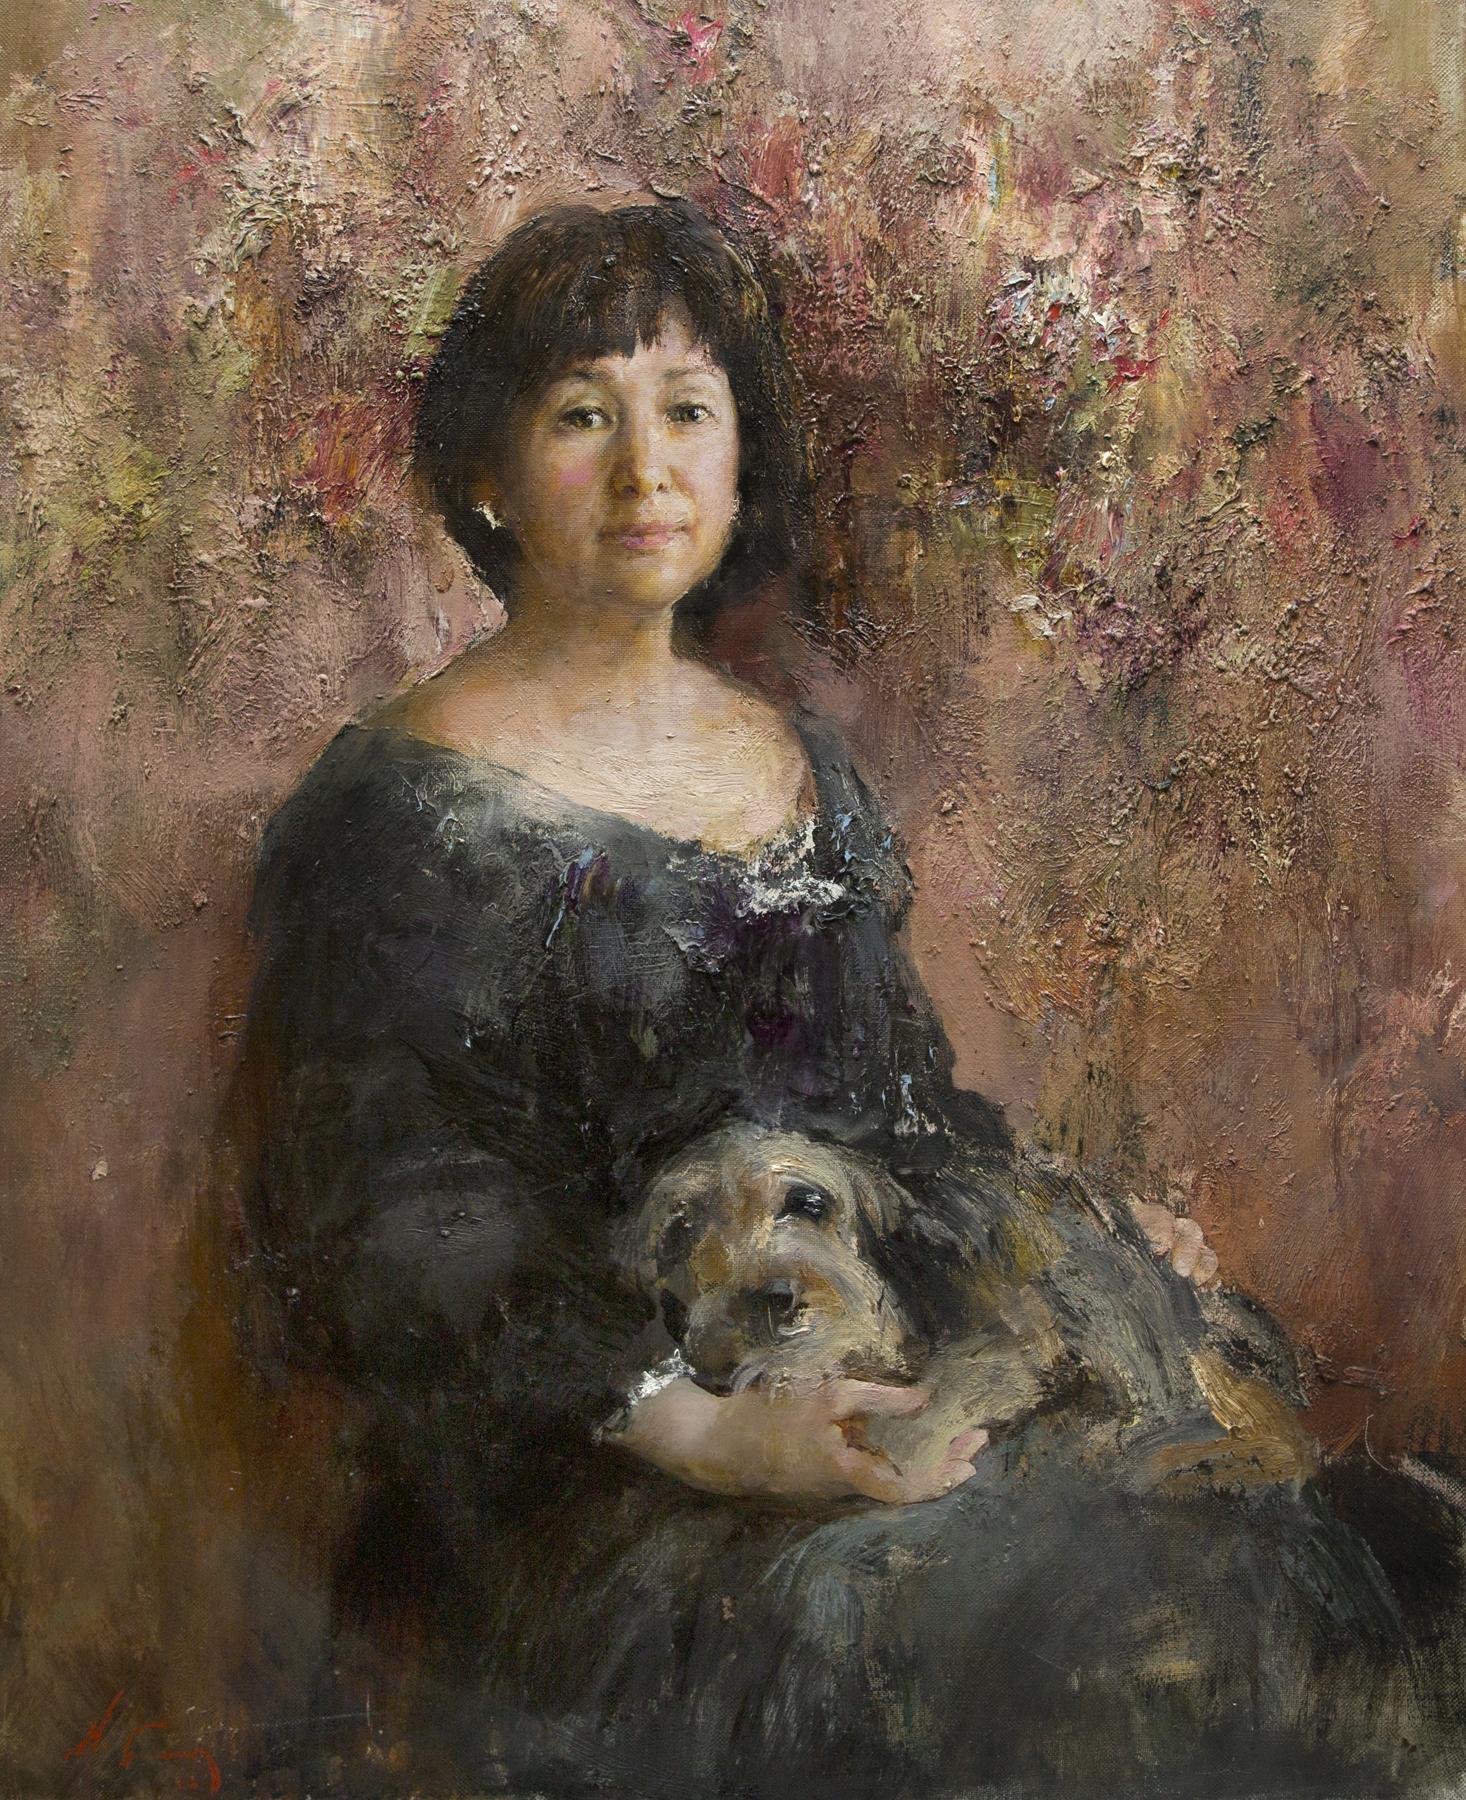 Portrait with a dog